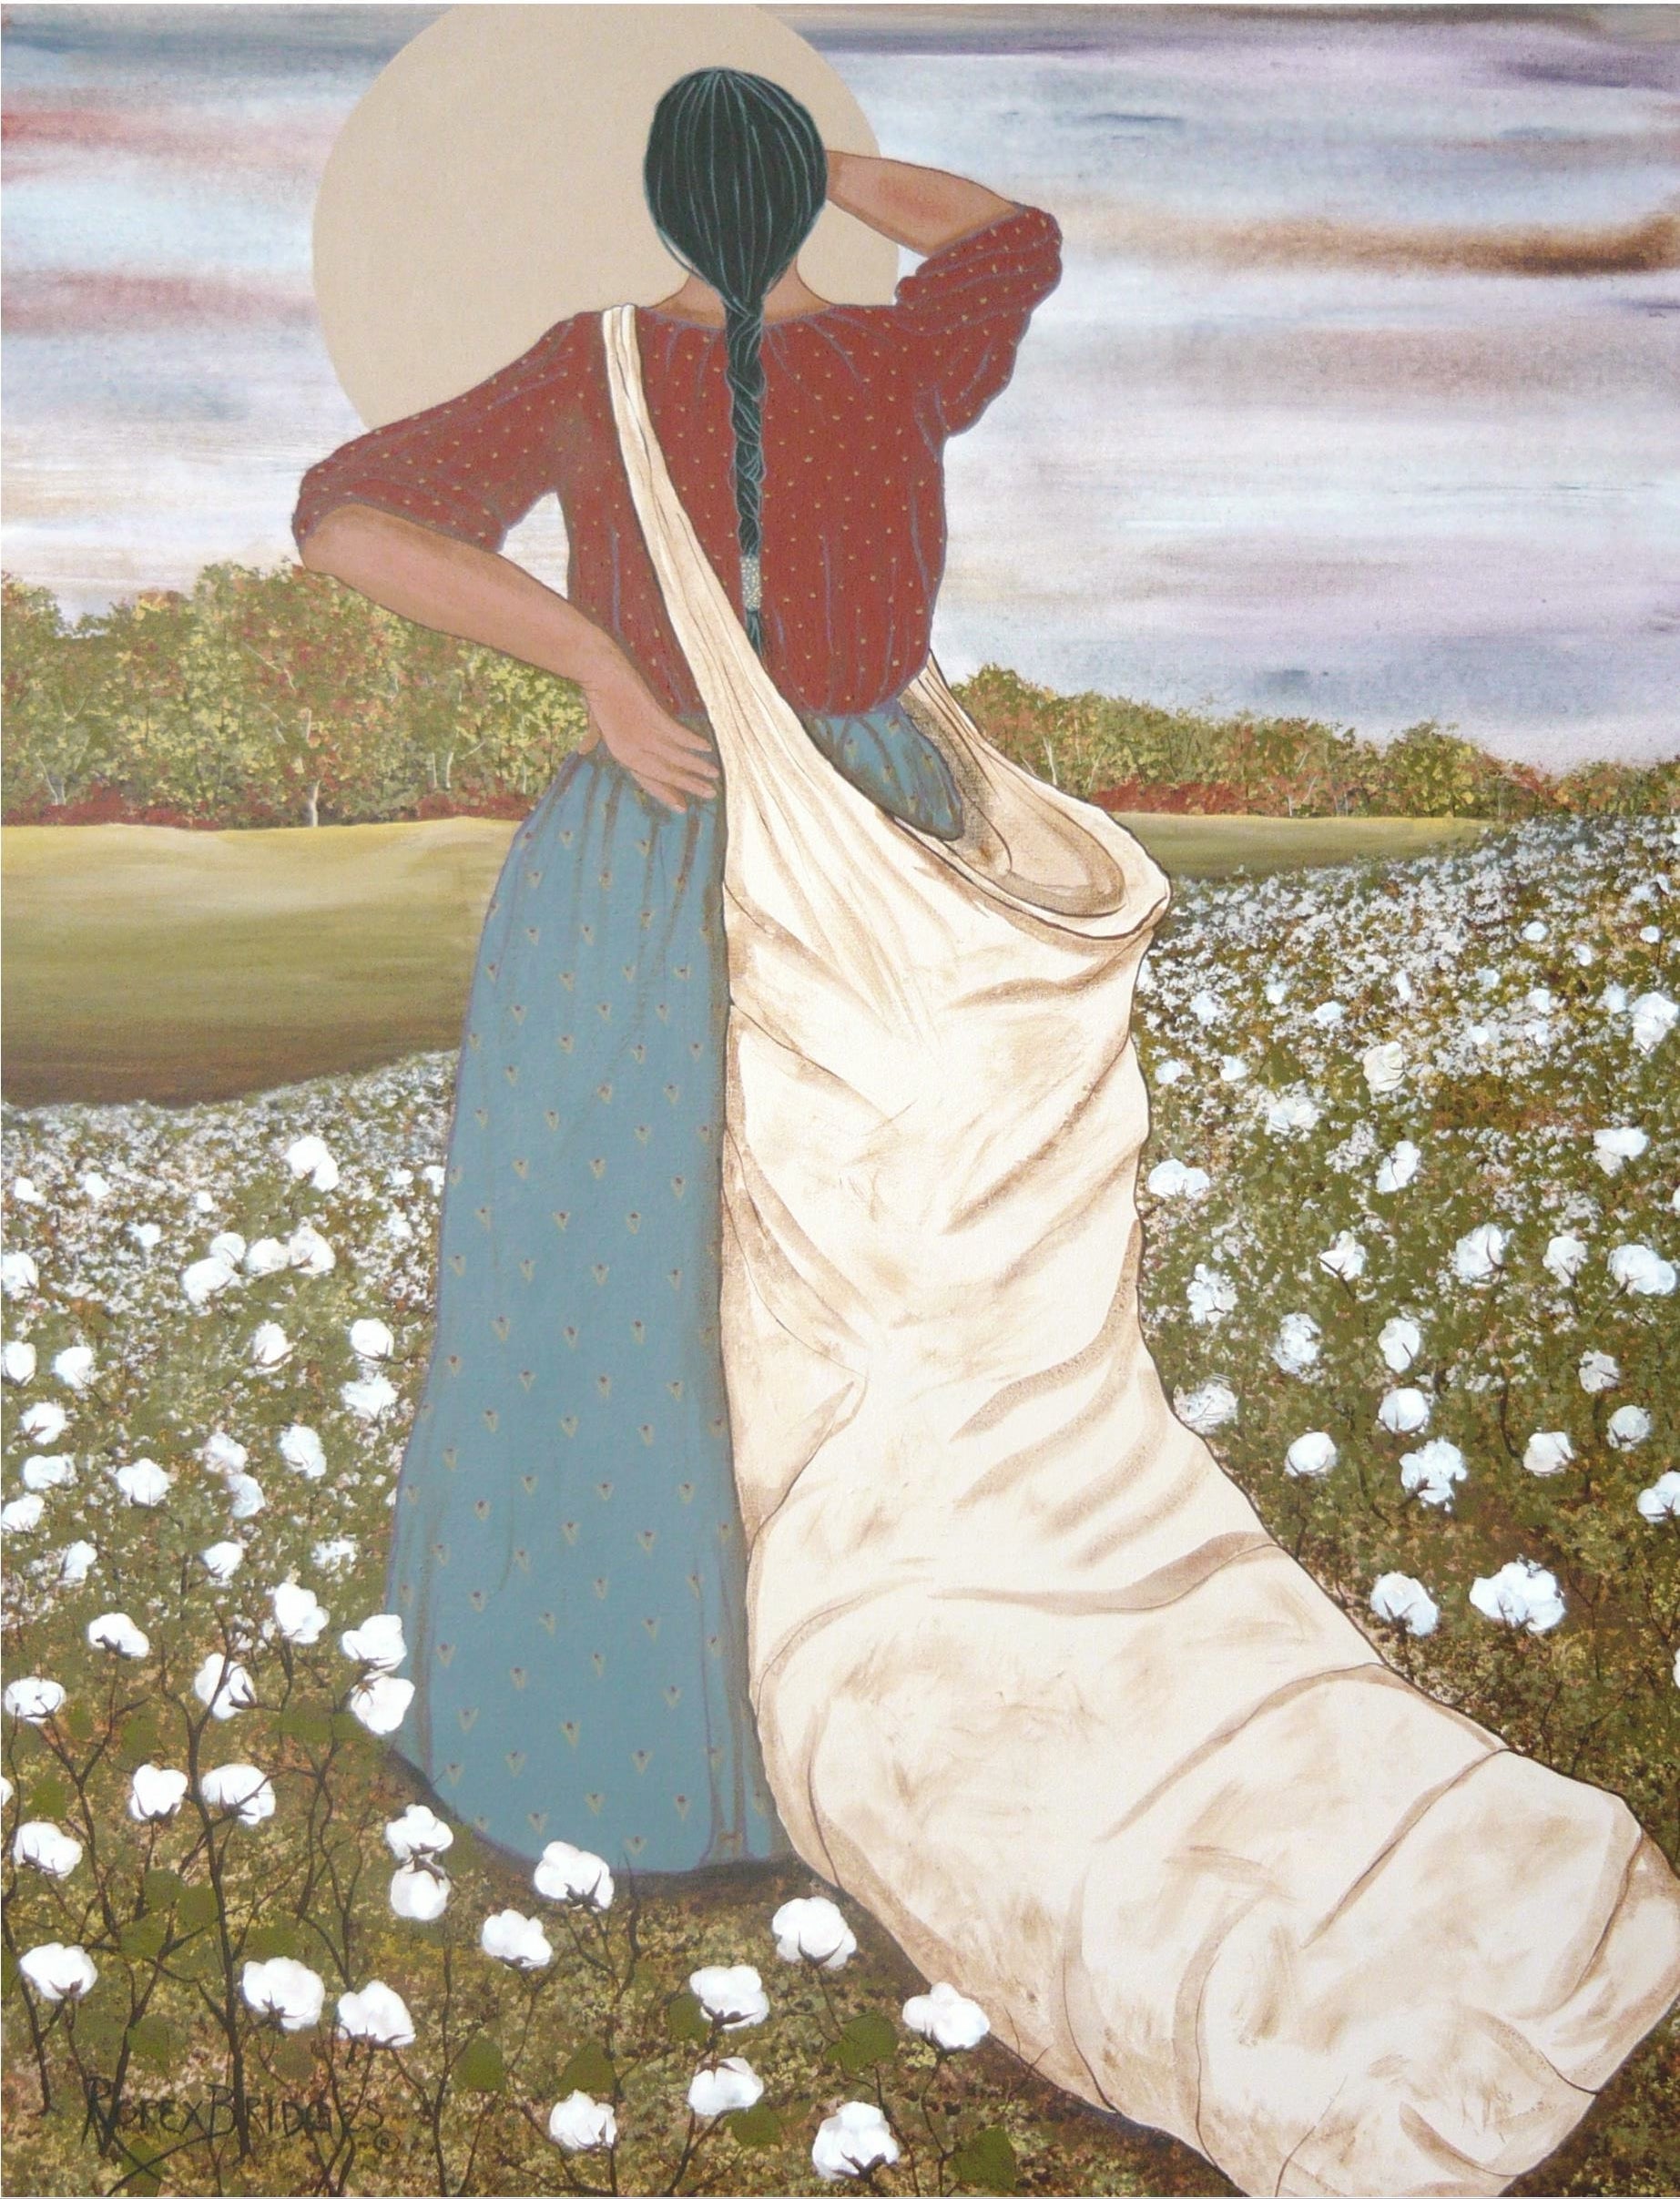  Native woman harvesting her first crop of cotton